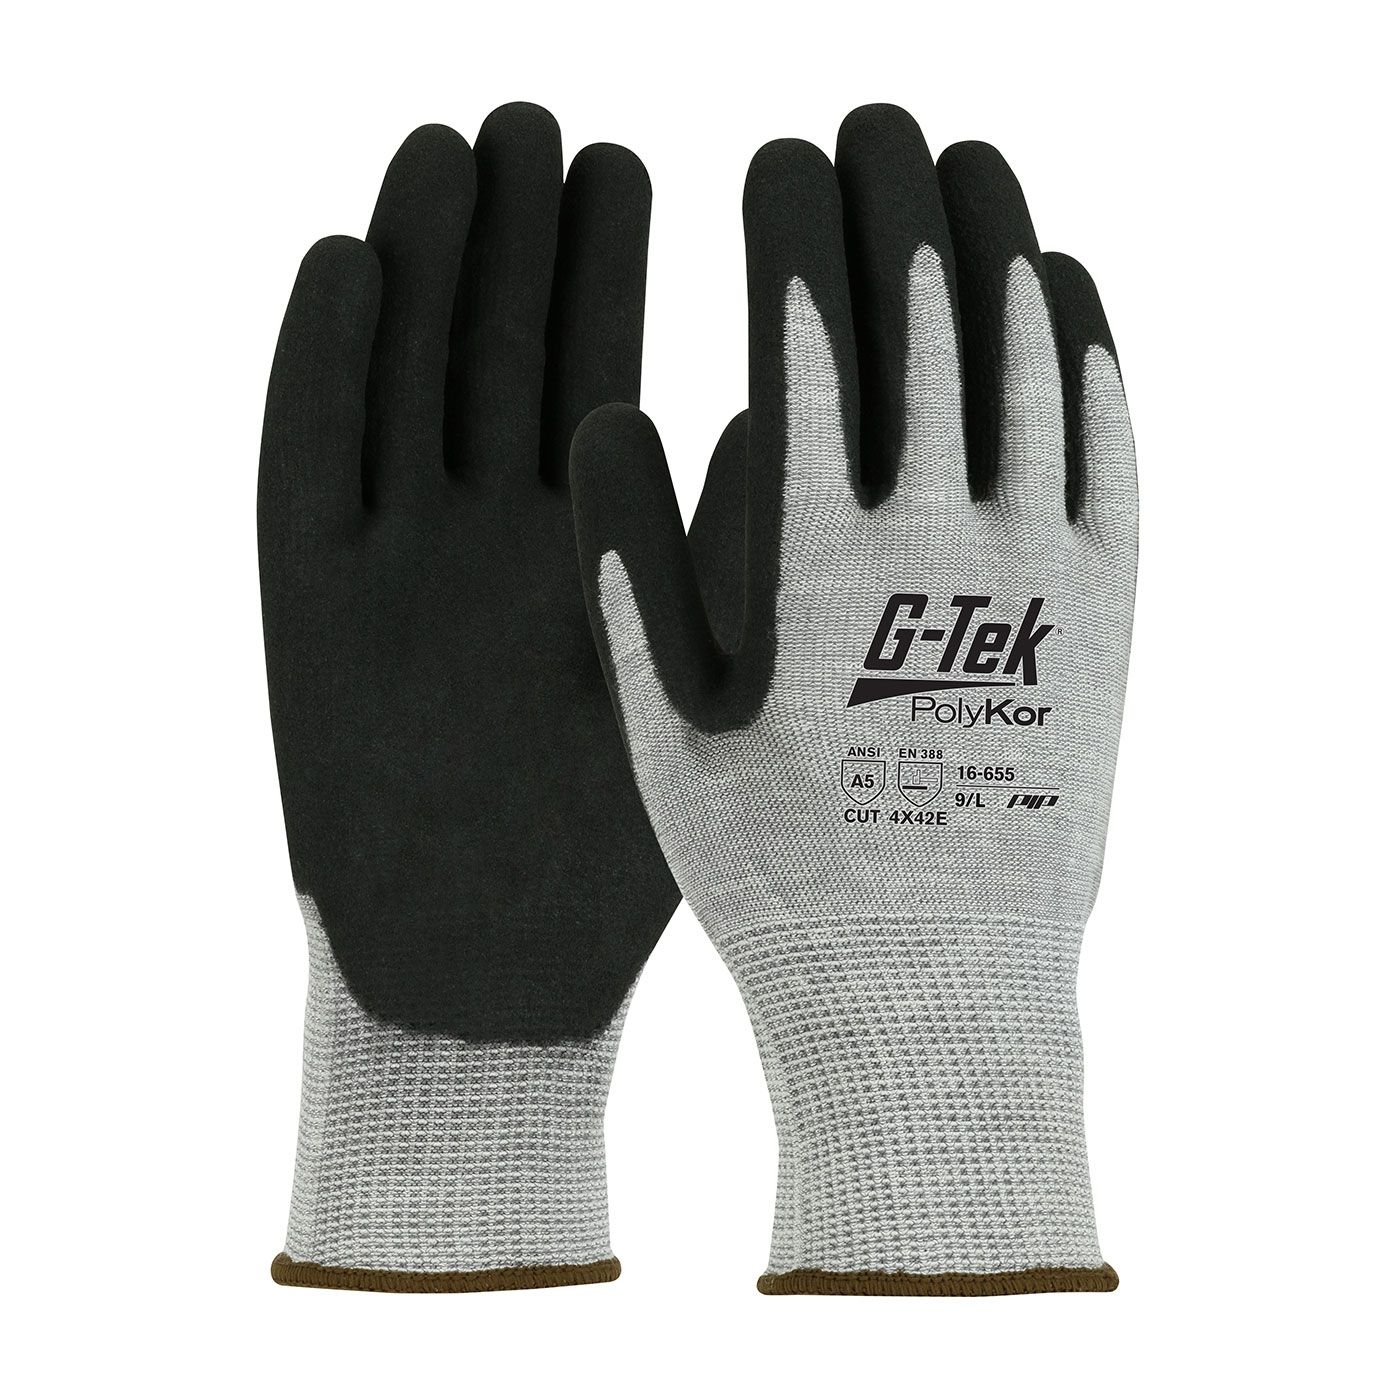 G-Tek Seamless Knit PolyKor Blended Glove with Double Dipped Nitrile Coated MicroSurface Grip on Palm & Fingers - Small